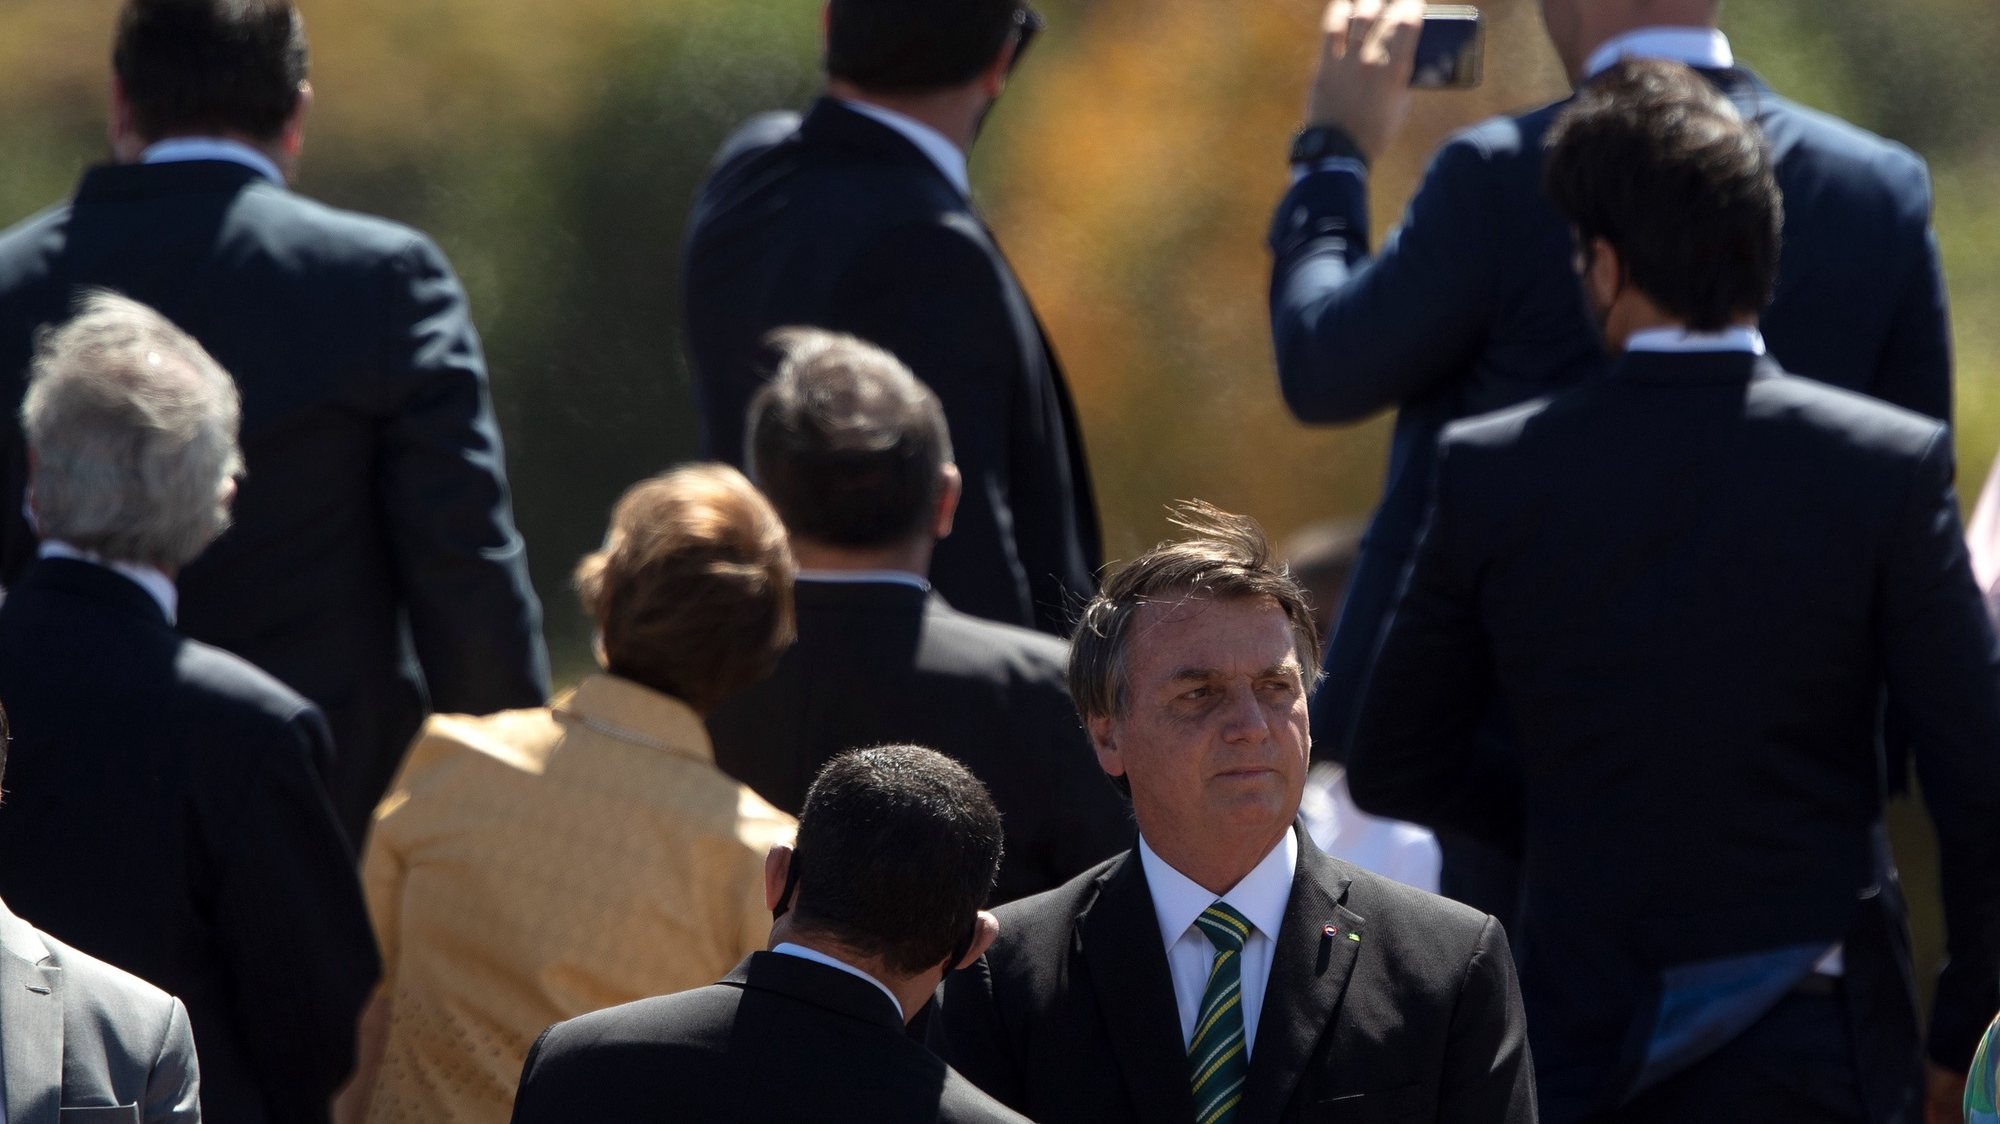 epa08652964 President of Brazil, Jair Bolsonaro (C), participates at an official ceremony at the Palacio de la Alvorada, in the city of Brasilia, Brazil, 07 September 2020. Bolsonaro led a simpler ceremony for Independence Day on 07 September, due to the COVID-19 pandemic, which has already caused nearly 127,000 deaths in the country.  EPA/JoÃ©dson Alves